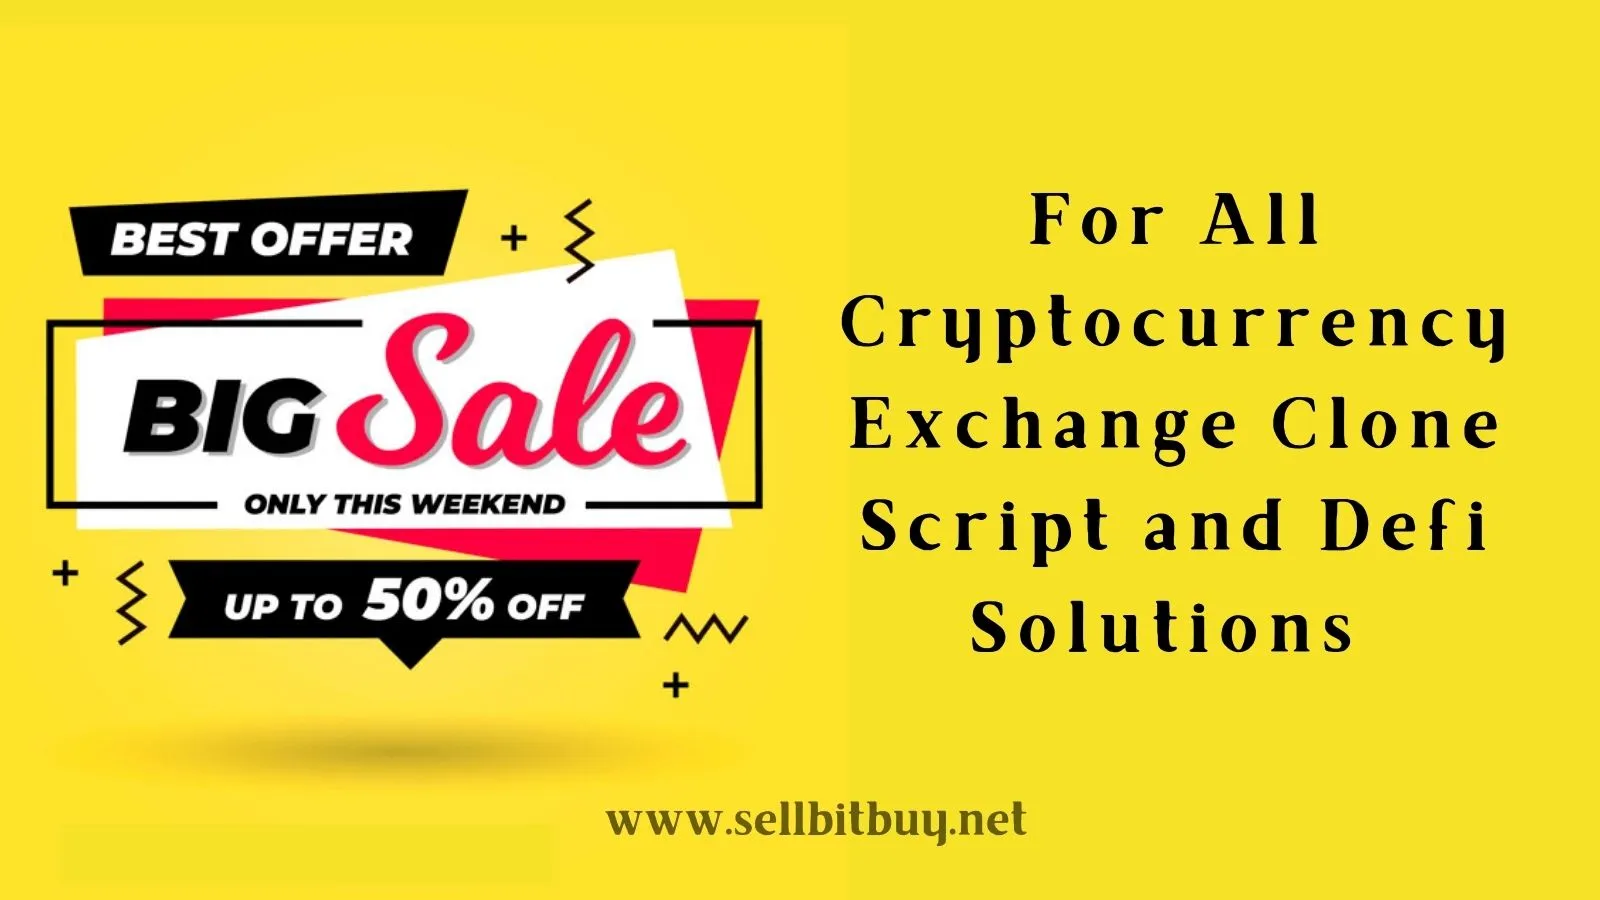 Financial Year End Offers Up to 50% On Sellbitbuy For All Product and Services in 2021 